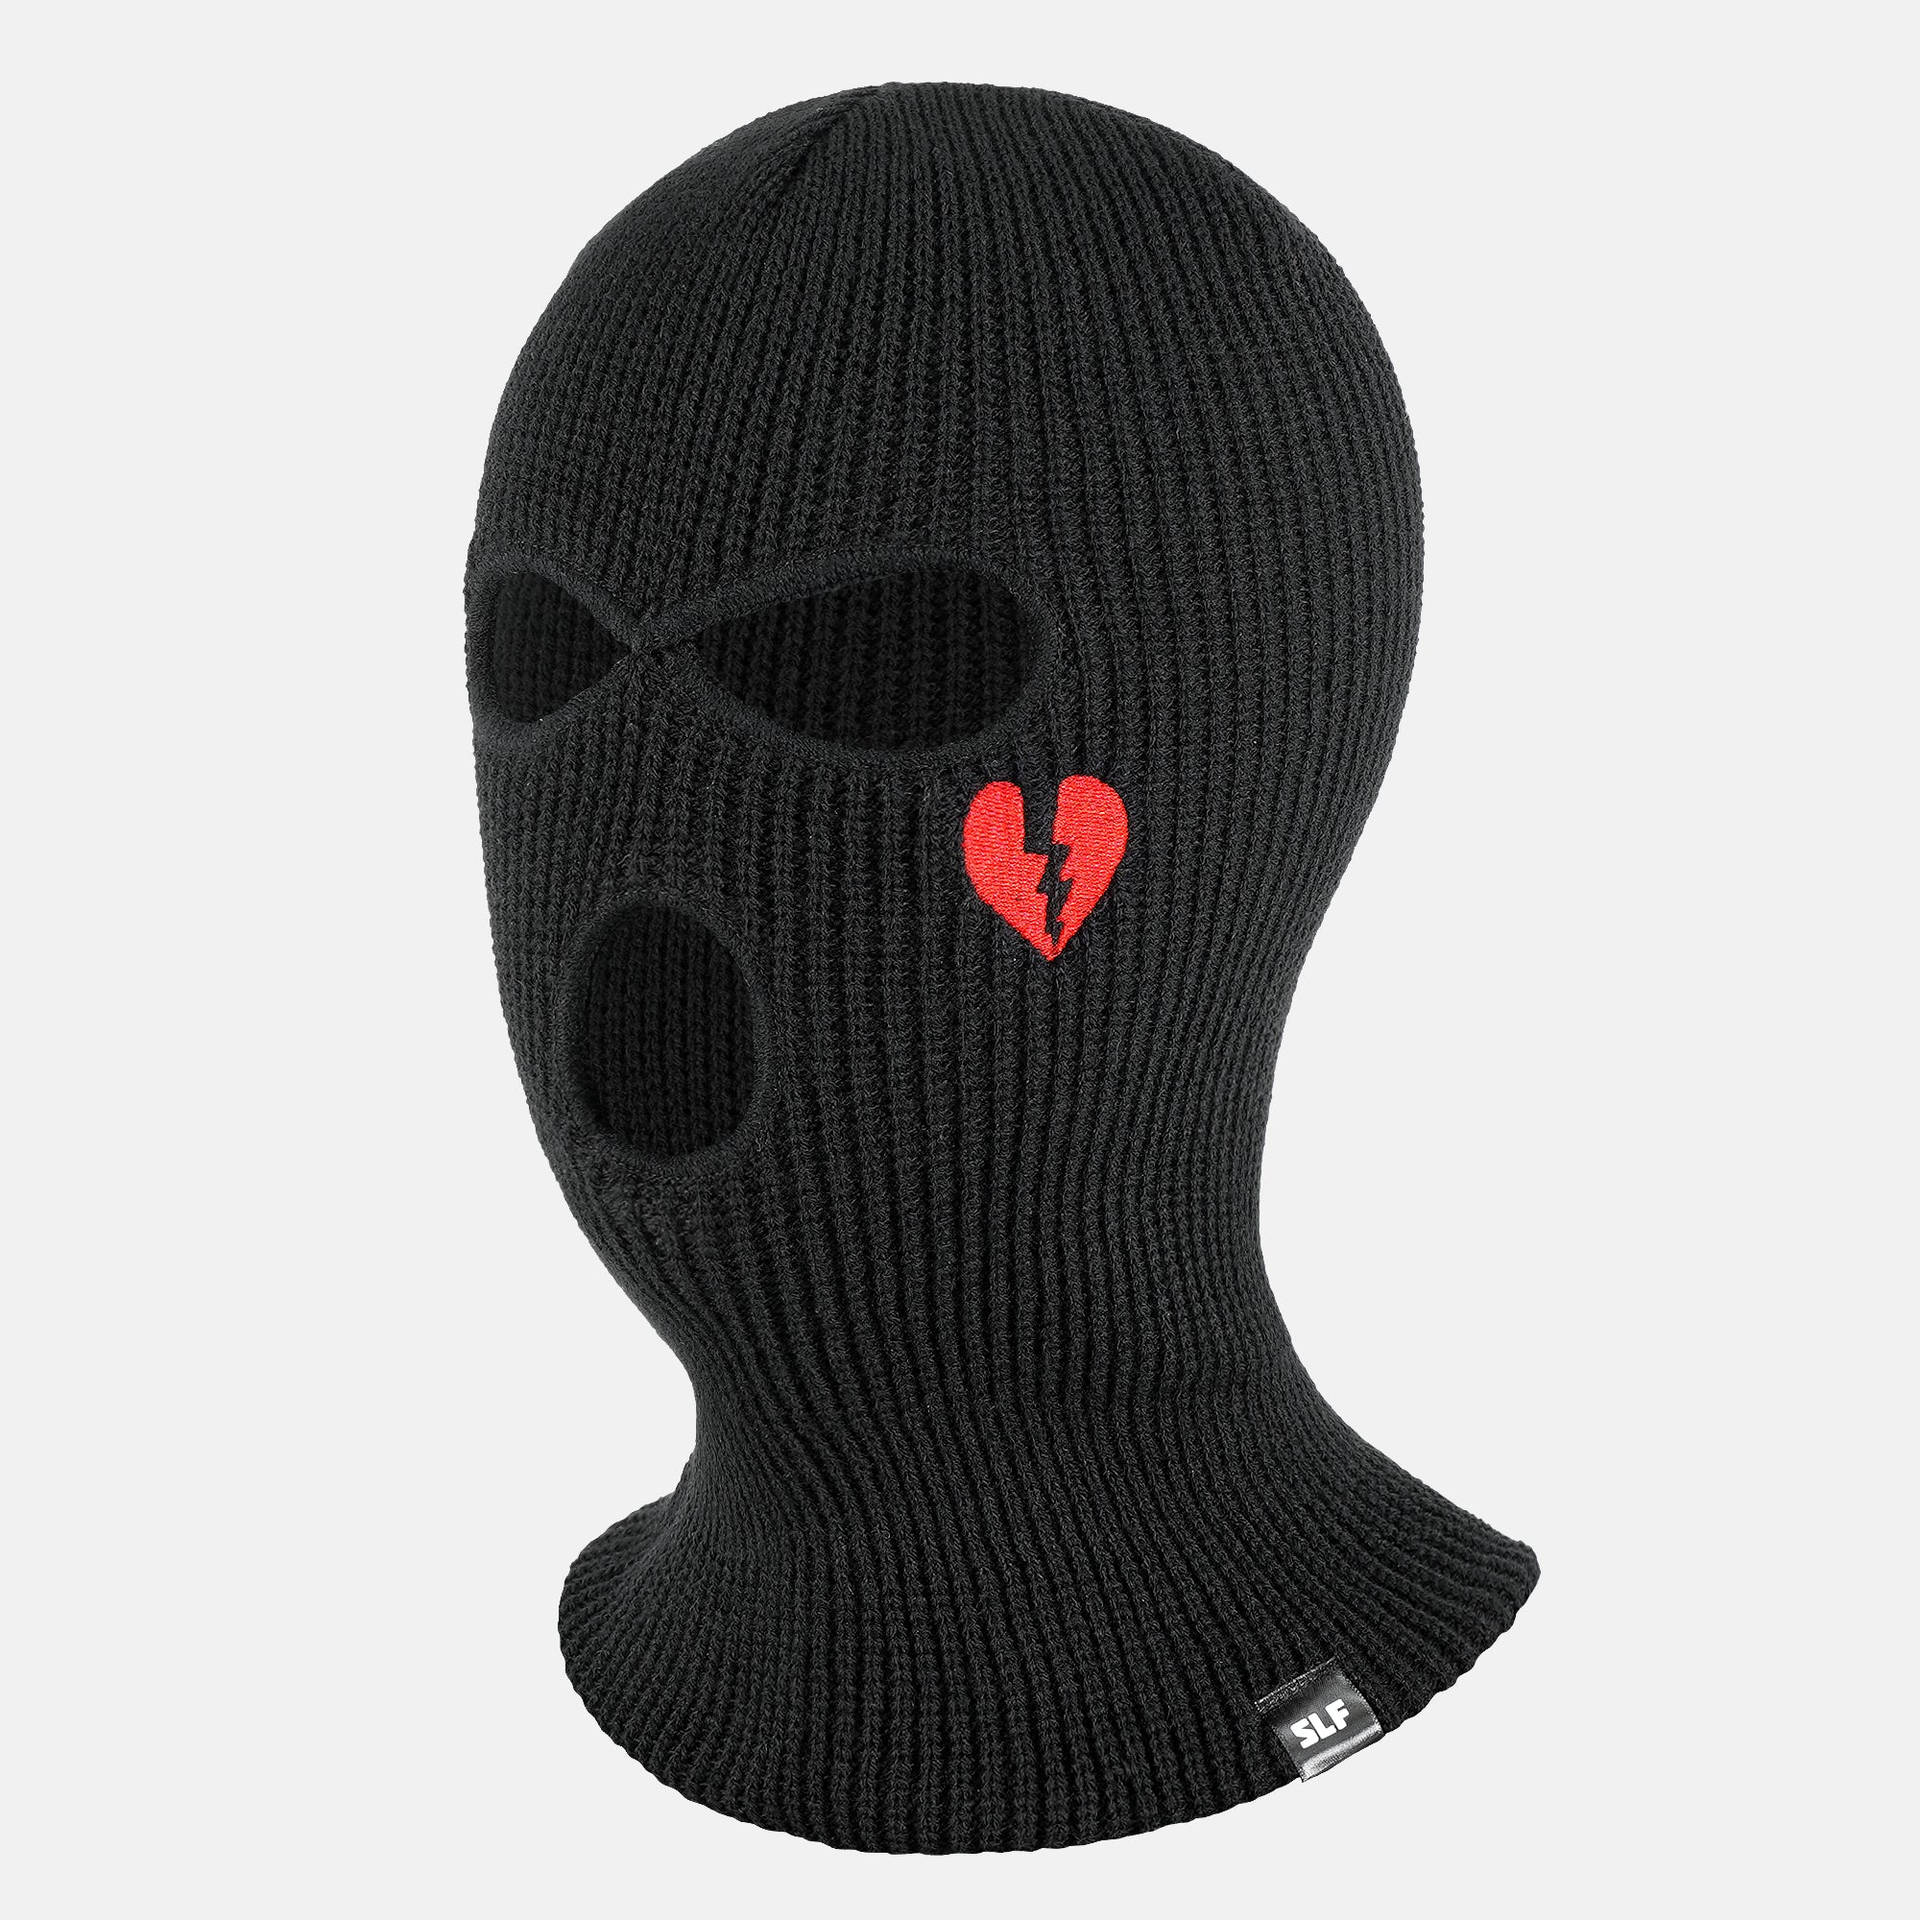 A Black Knitted Mask With A Heart On It Wallpaper